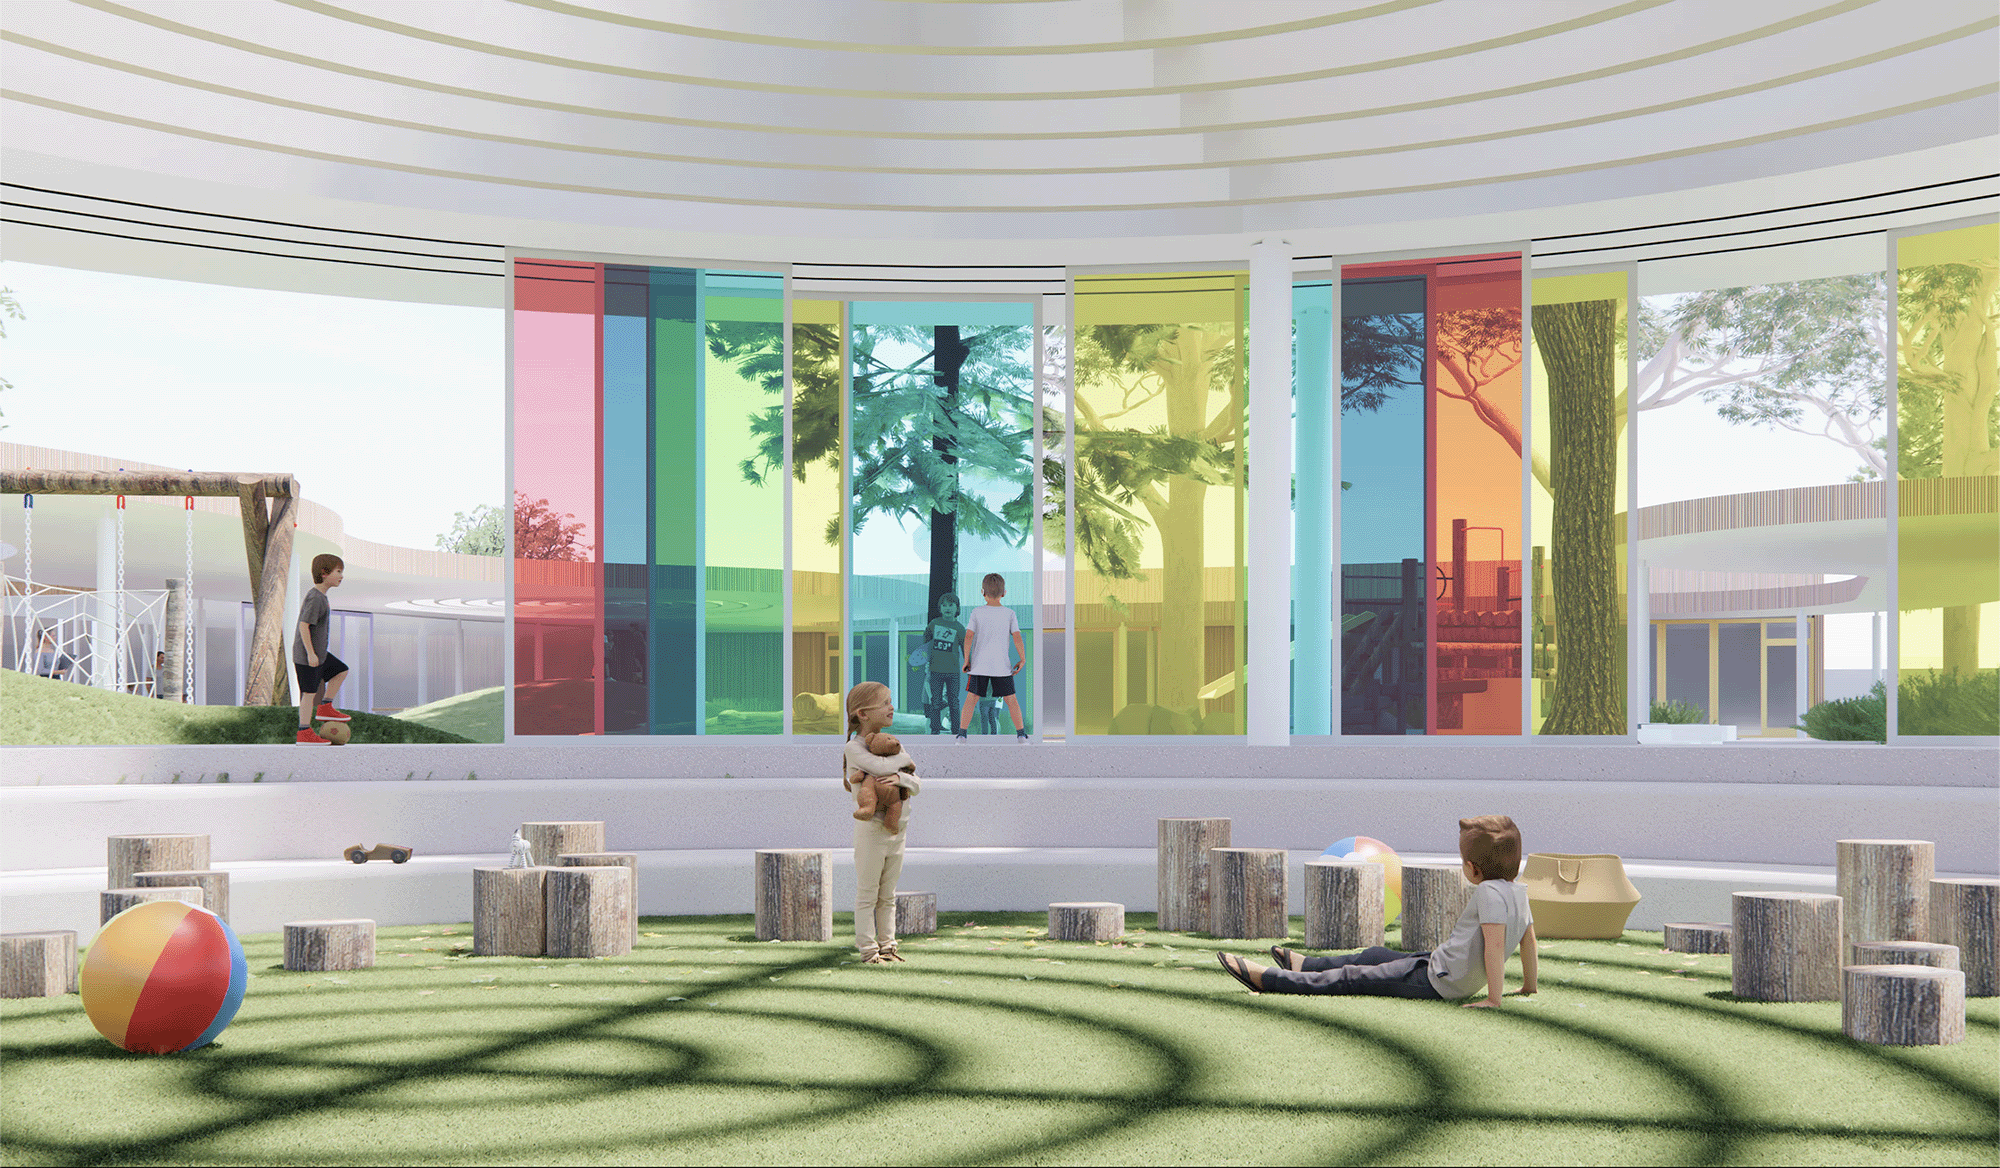 Render of children in colorful play area